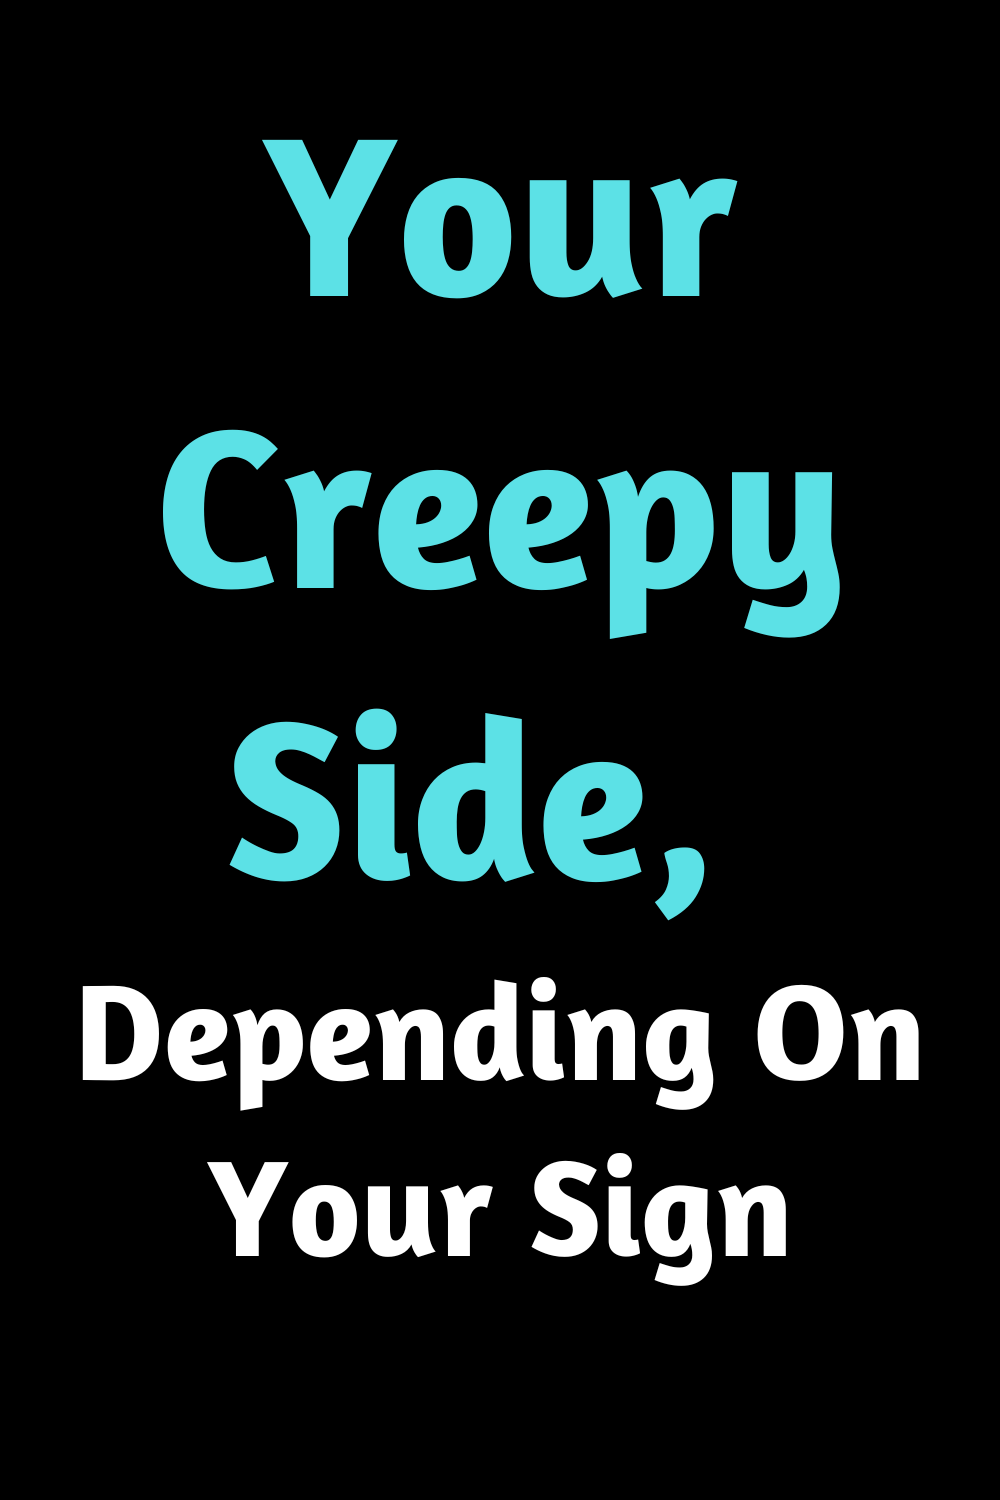 Your Creepy Side, Depending On Your Sign